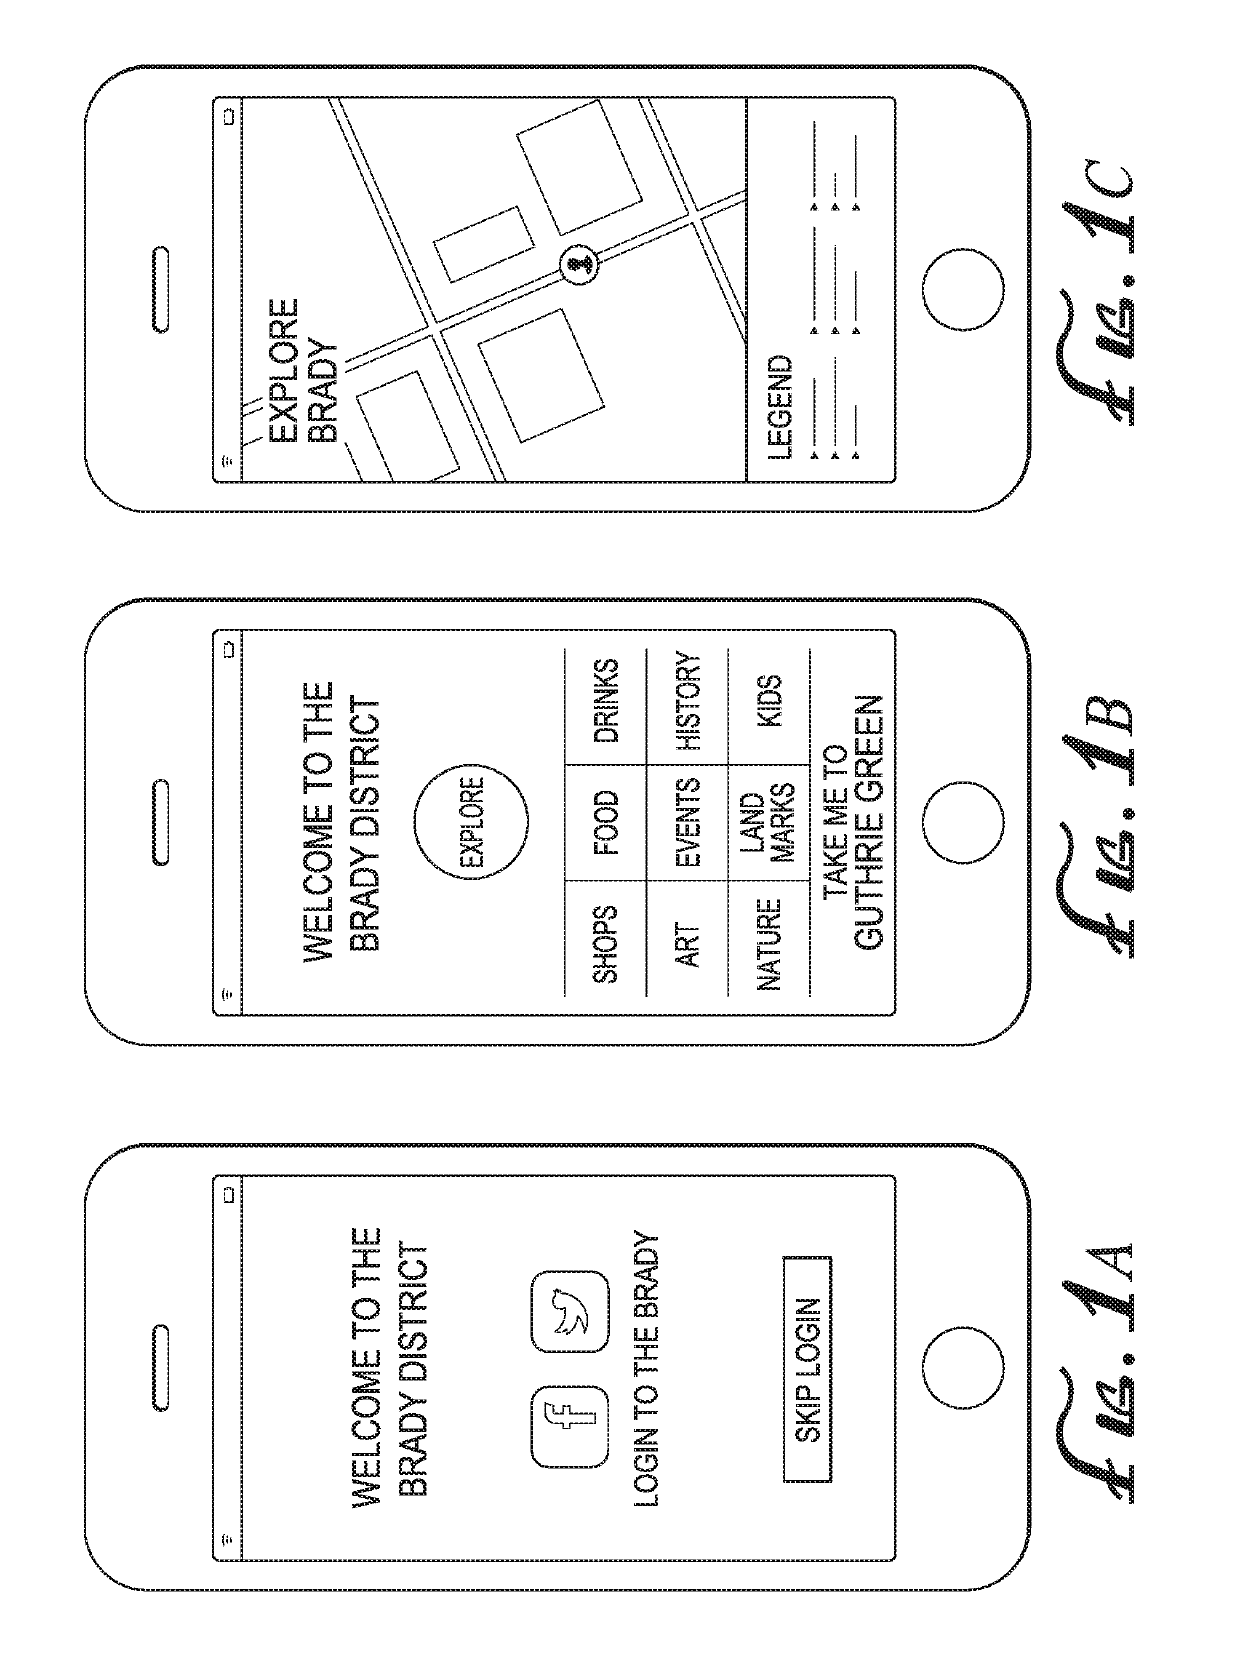 Location based mobile device system and application for providing artifact tours